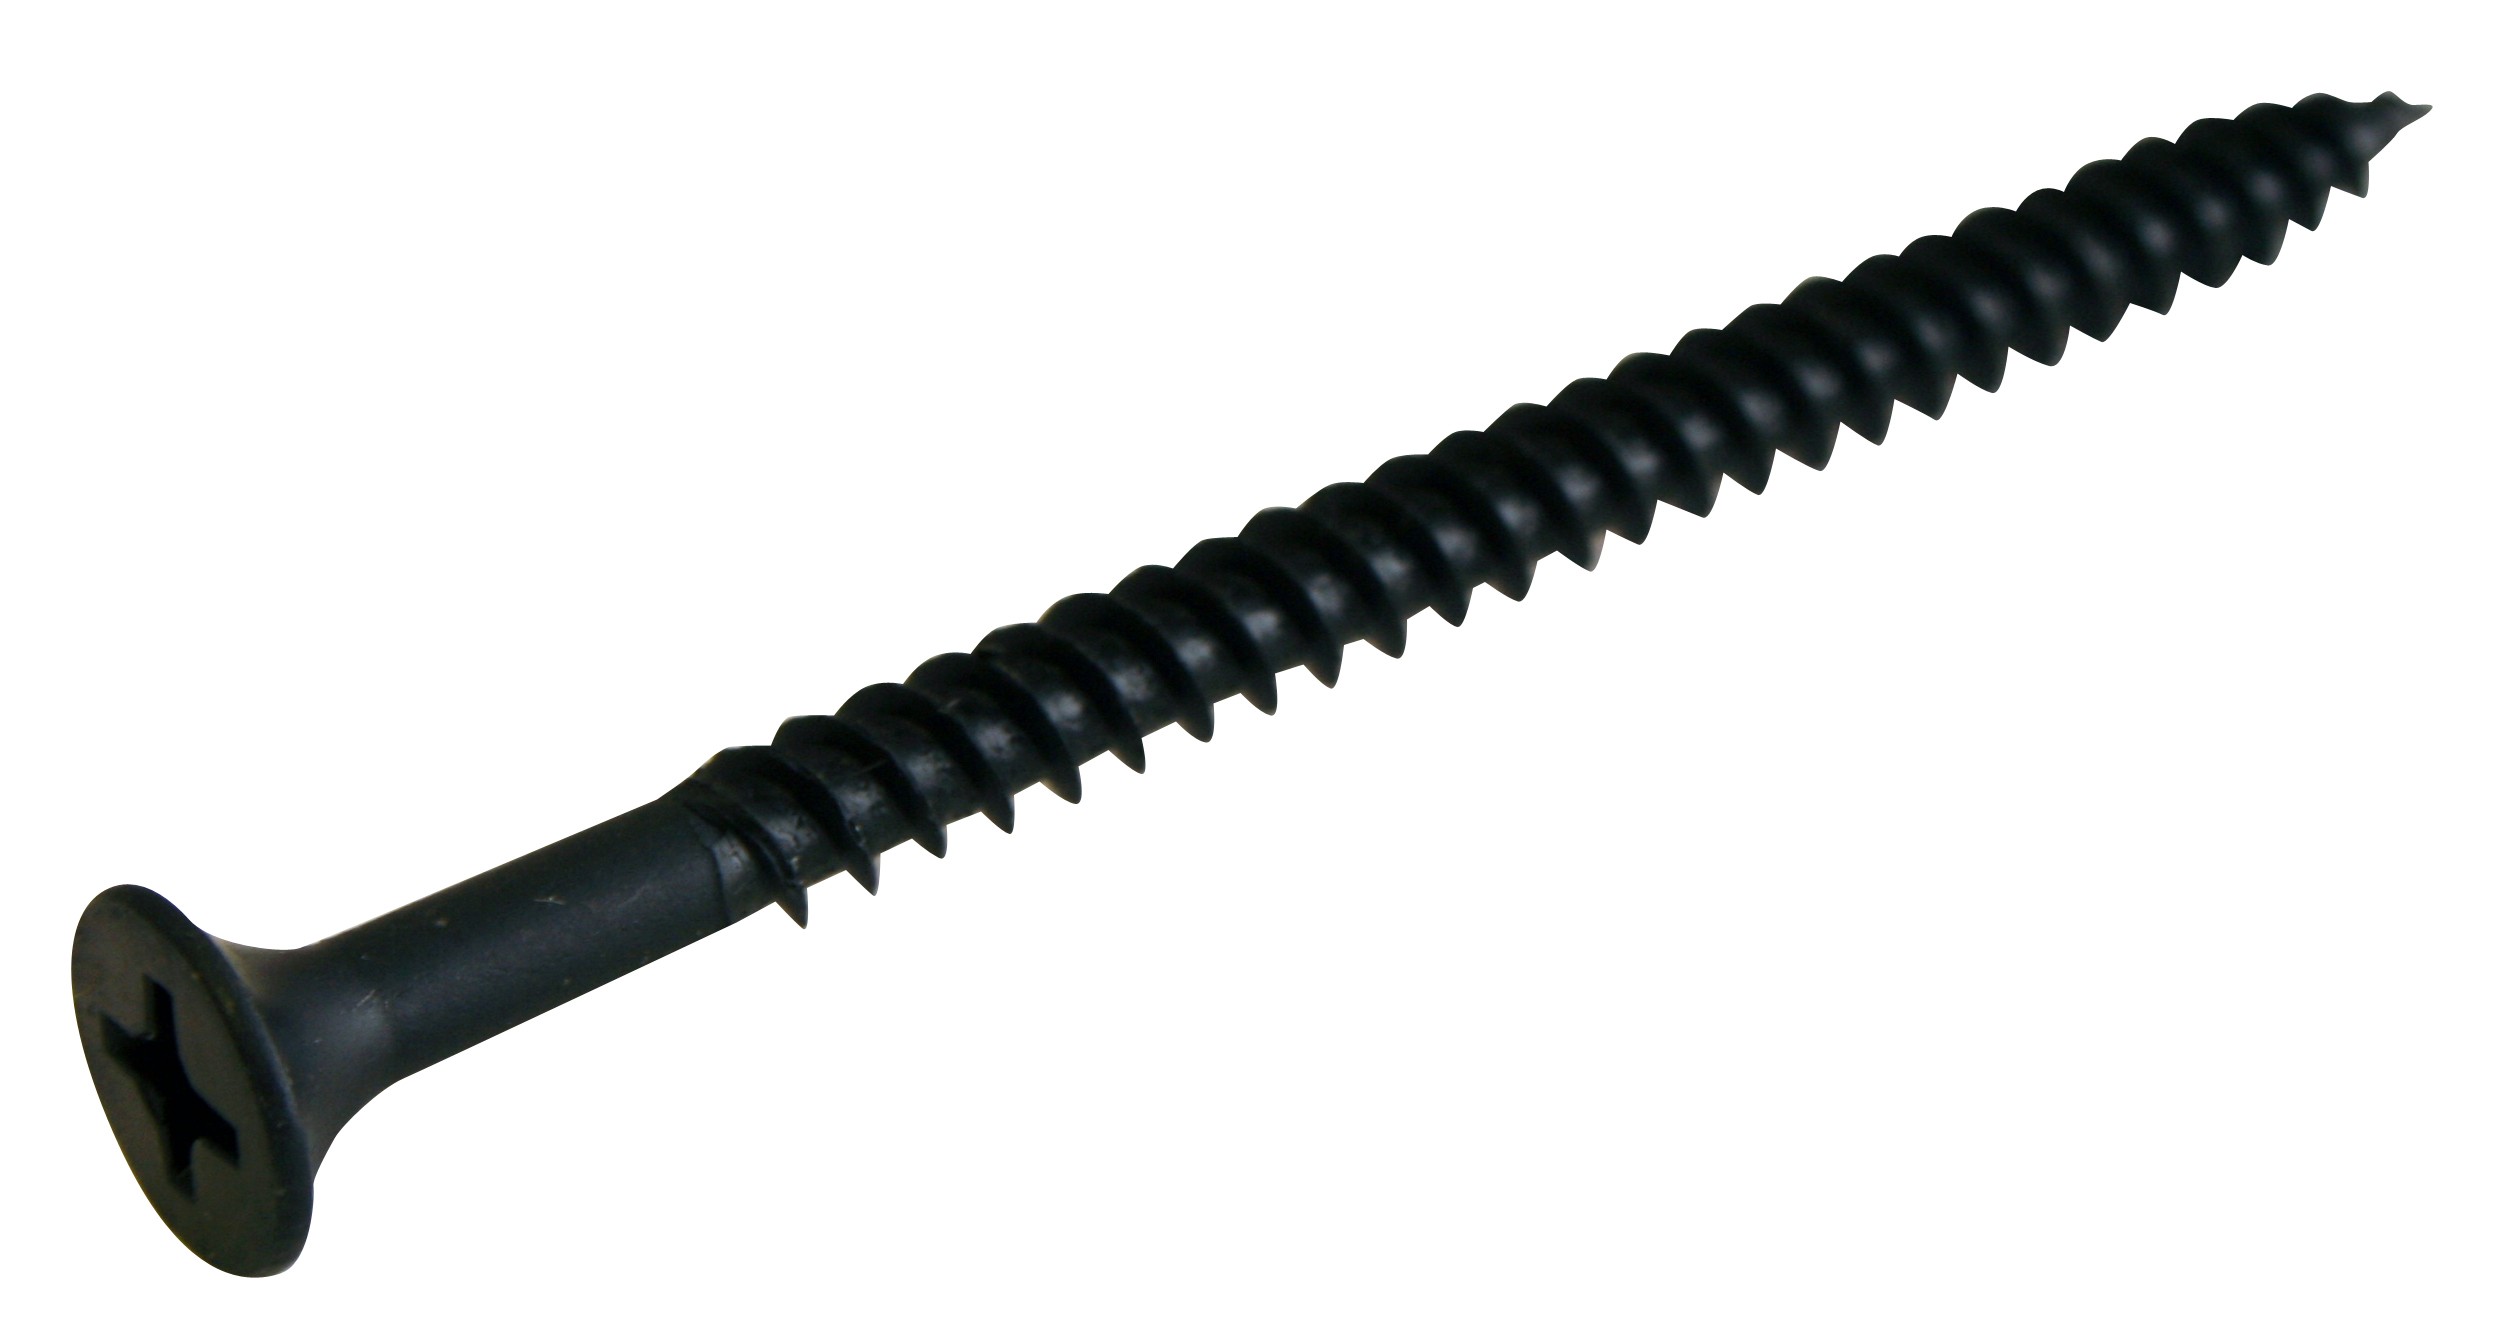 Inch NF Length: 1 #6 x 1 FINE Drywall Screws PHOS Phillips Head: Bugle Material: Steel Finish: Phosphate Bugle Quantity: 100 Size: #6